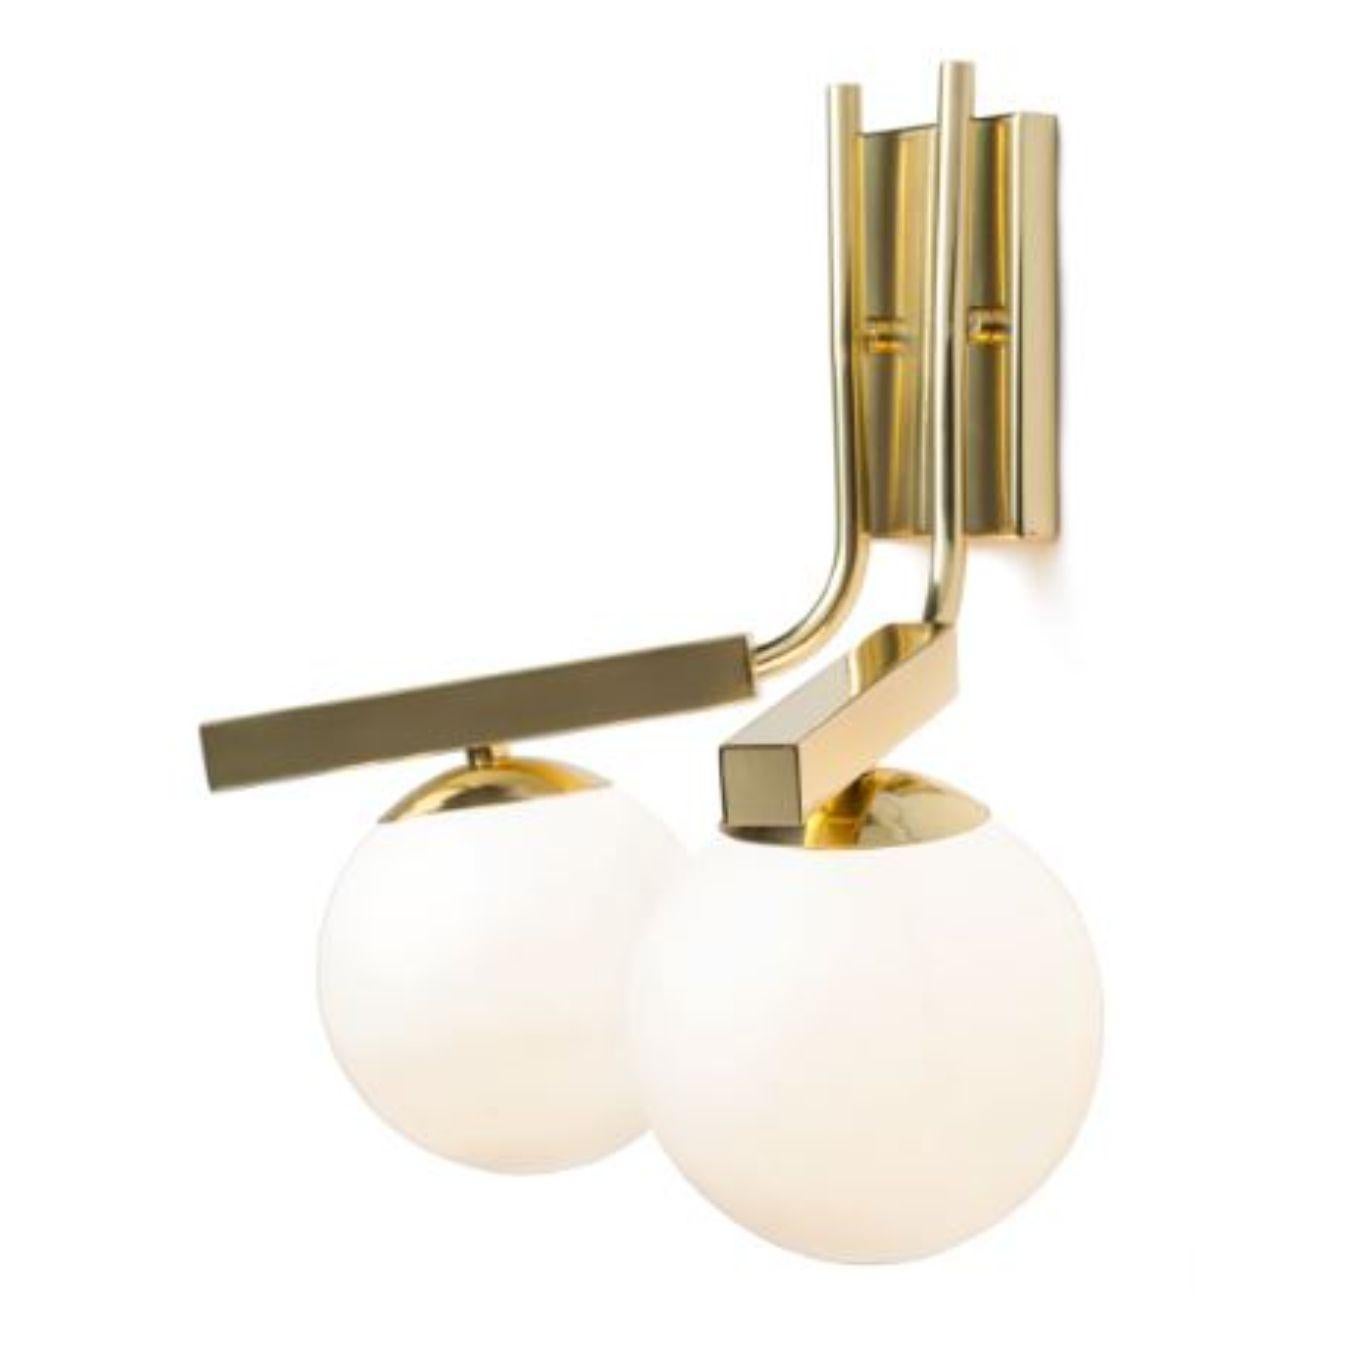 Brass globe wall I lamp by Dooq
Dimensions: W 36 x D 33 x H 41 cm
Materials: lacquered metal, polished or brushed metal, brass.
Also available in different colours and materials.

Information:
230V/50Hz
2 x max. G9
4W LED

120V/60Hz
2 x max. G9
4W